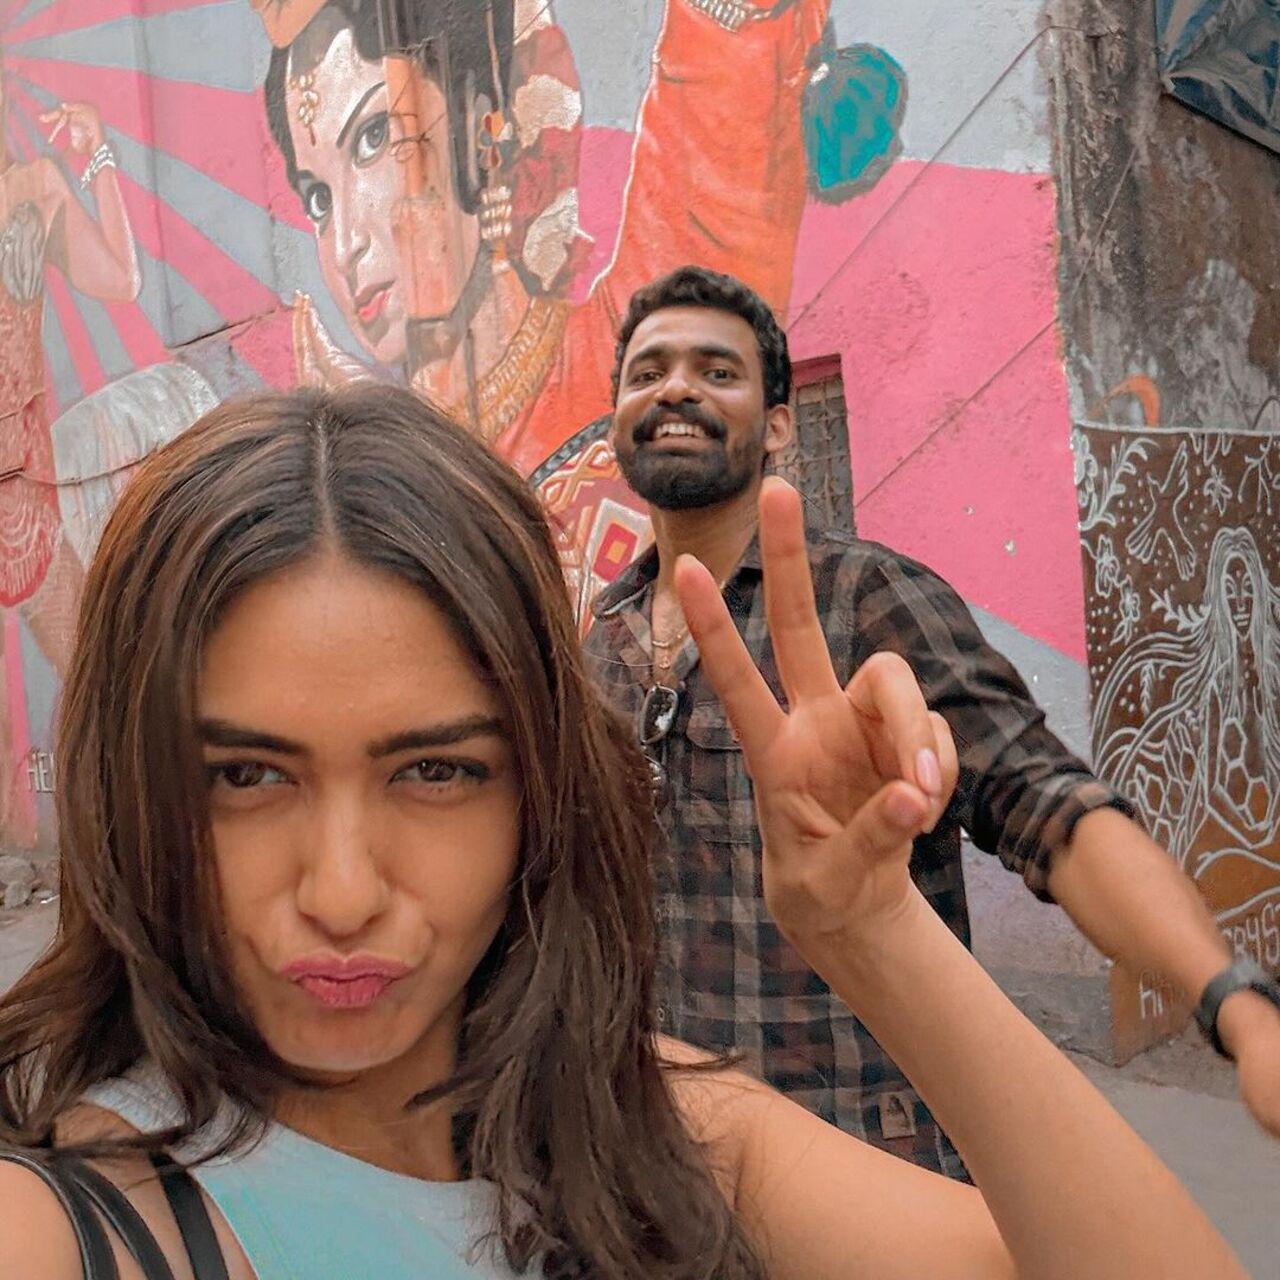 Mrunal also took some goofy selfies with her friend and posed in front of a mural. 